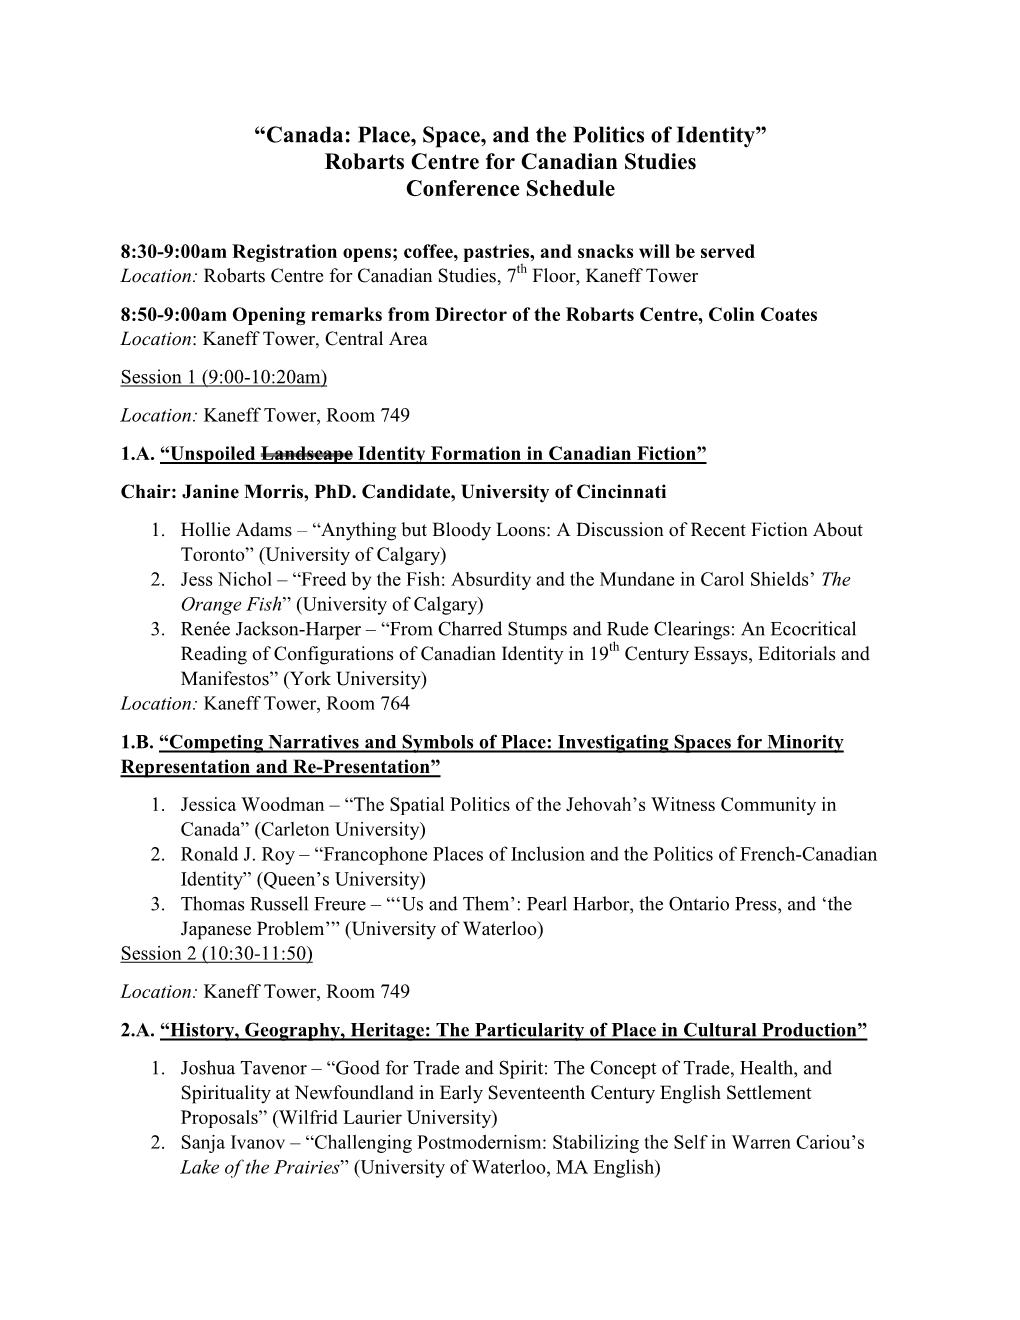 “Canada: Place, Space, and the Politics of Identity” Robarts Centre for Canadian Studies Conference Schedule